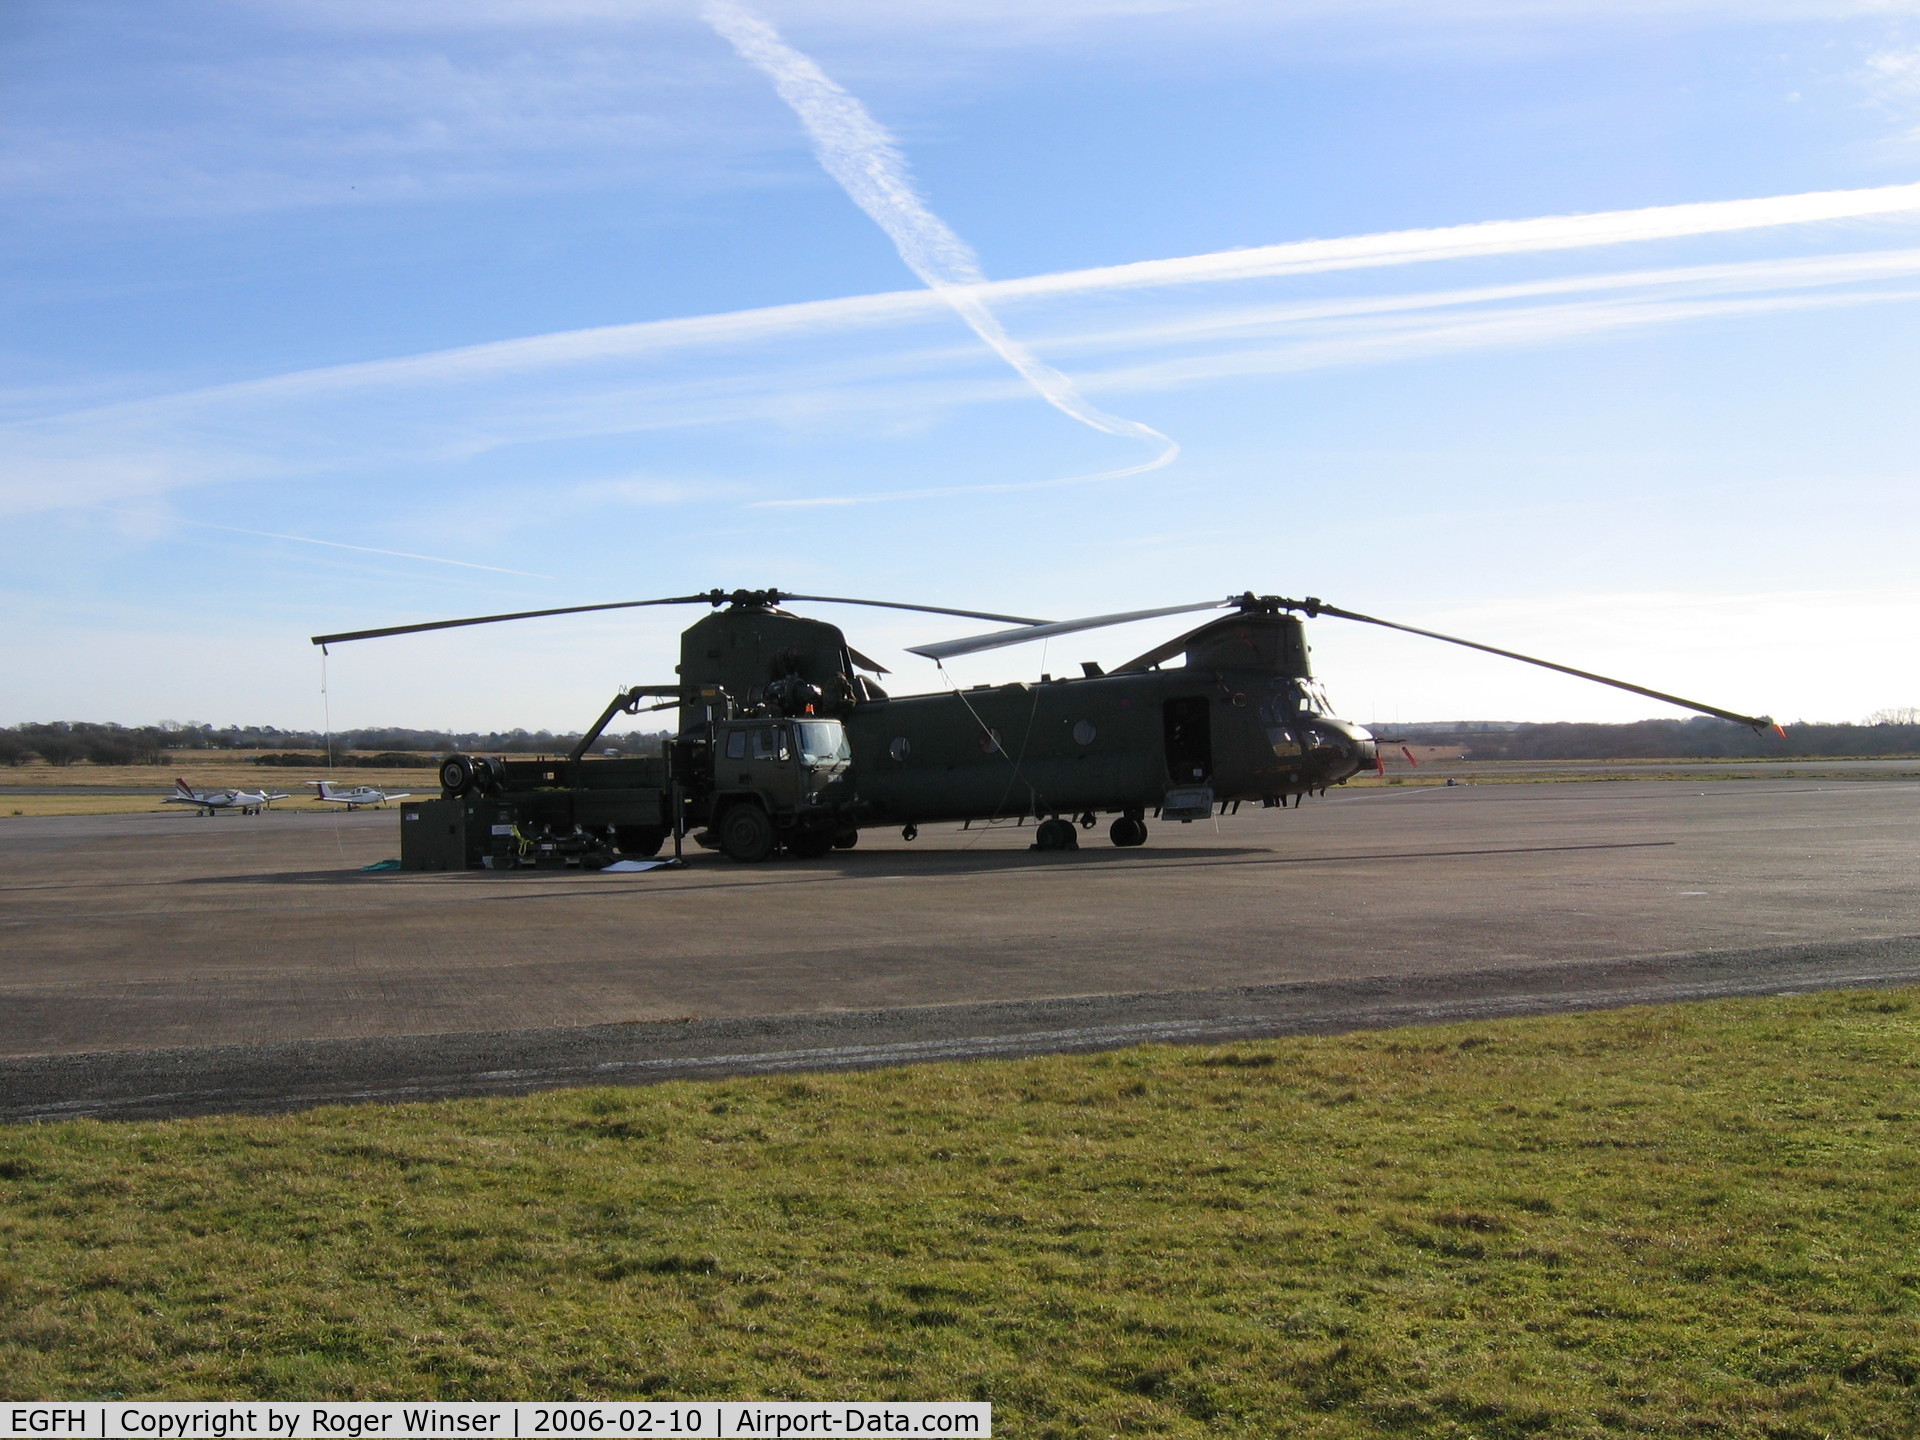 Swansea Airport, Swansea, Wales United Kingdom (EGFH) - RAF Chinook HC.2 gets a new starboard engine